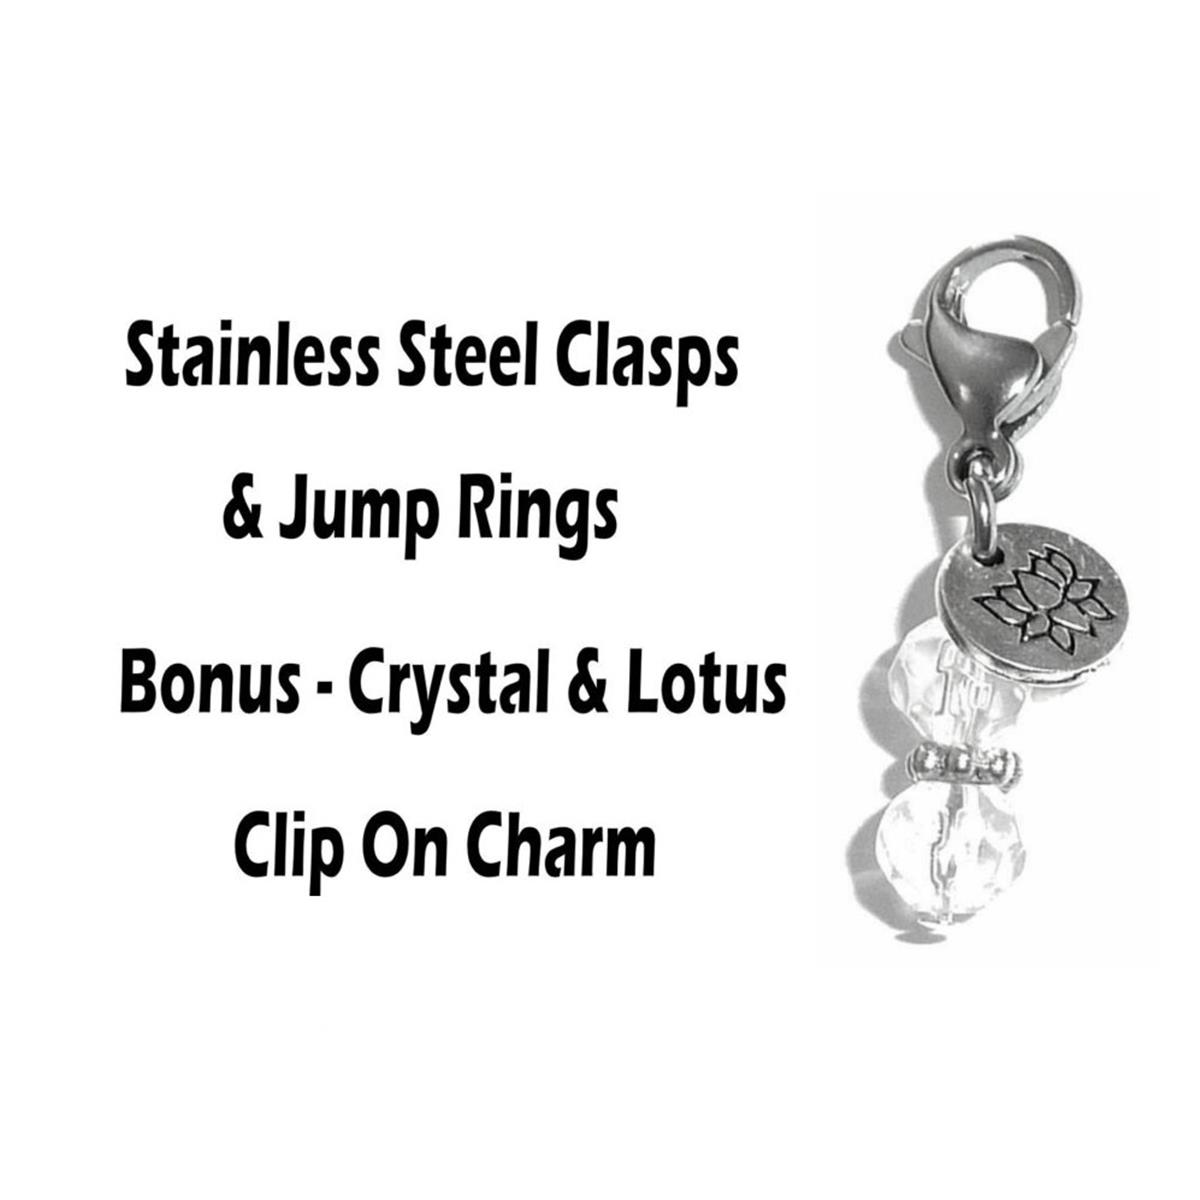 Though She Be But Little She Is Fierce Clip On Charms - Whimsical Charms Clip On Anywhere